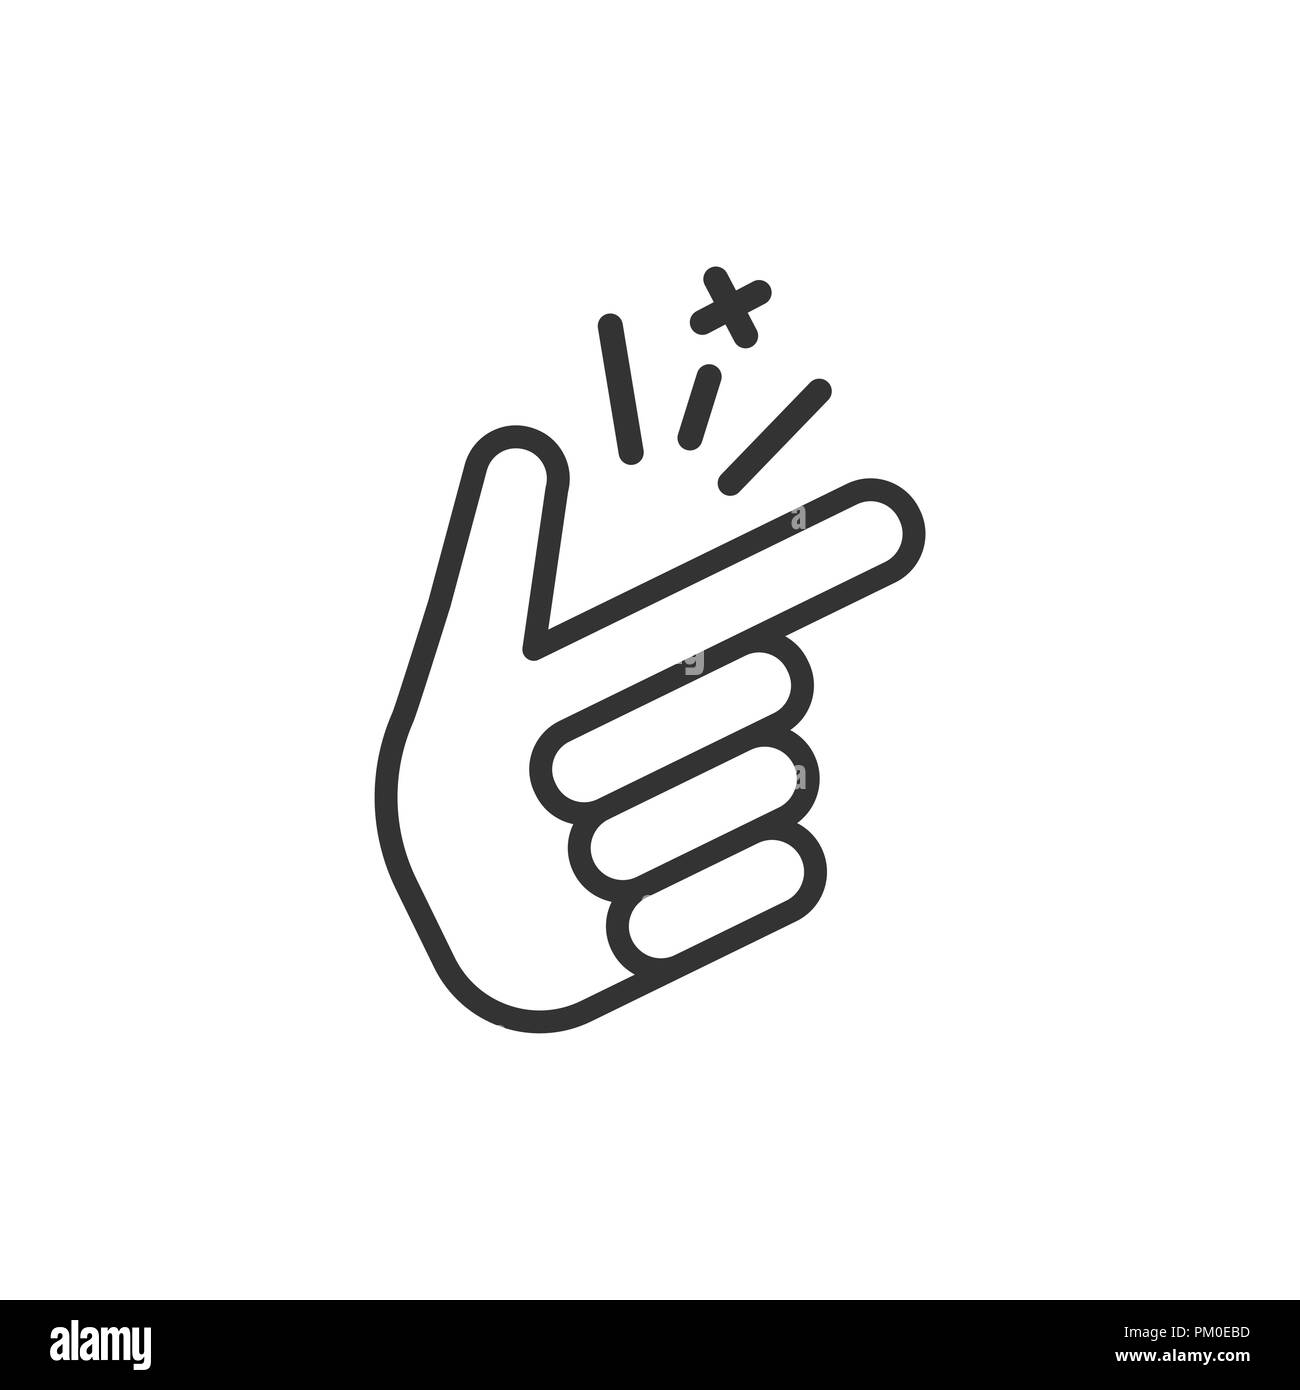 Finger Flick Male Hand Isolated On Stock Vector (Royalty Free